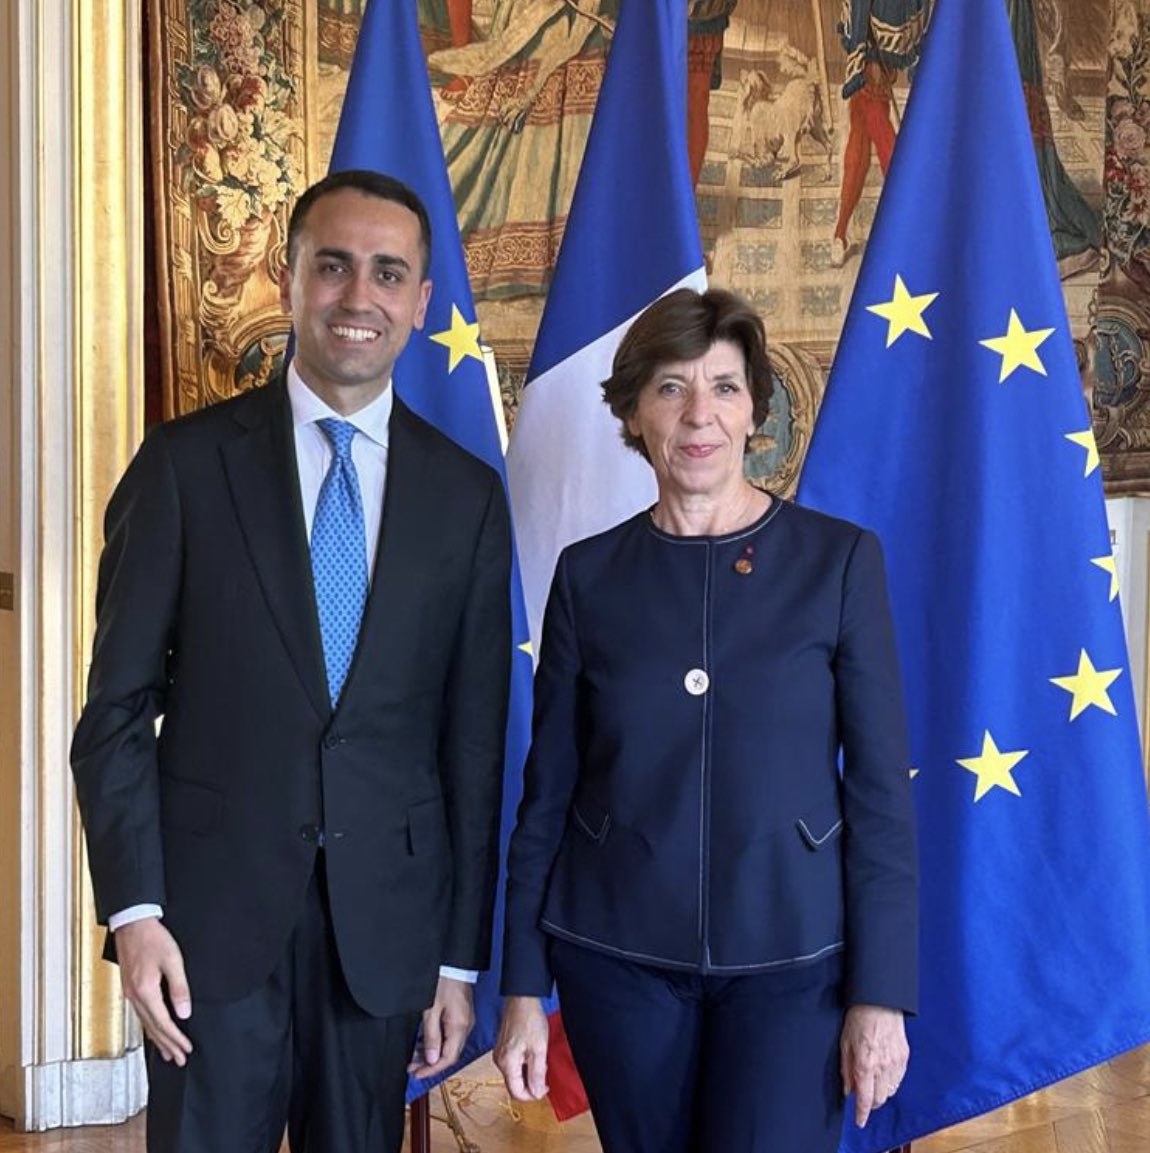 Great pleasure to meet @MinColonna. France has a unique regional expertise &has been leading voice to elevate EU partnership with the Gulf. Looking fwd to working in #TeamEurope to make this happen @francediplo @JosepBorrellF